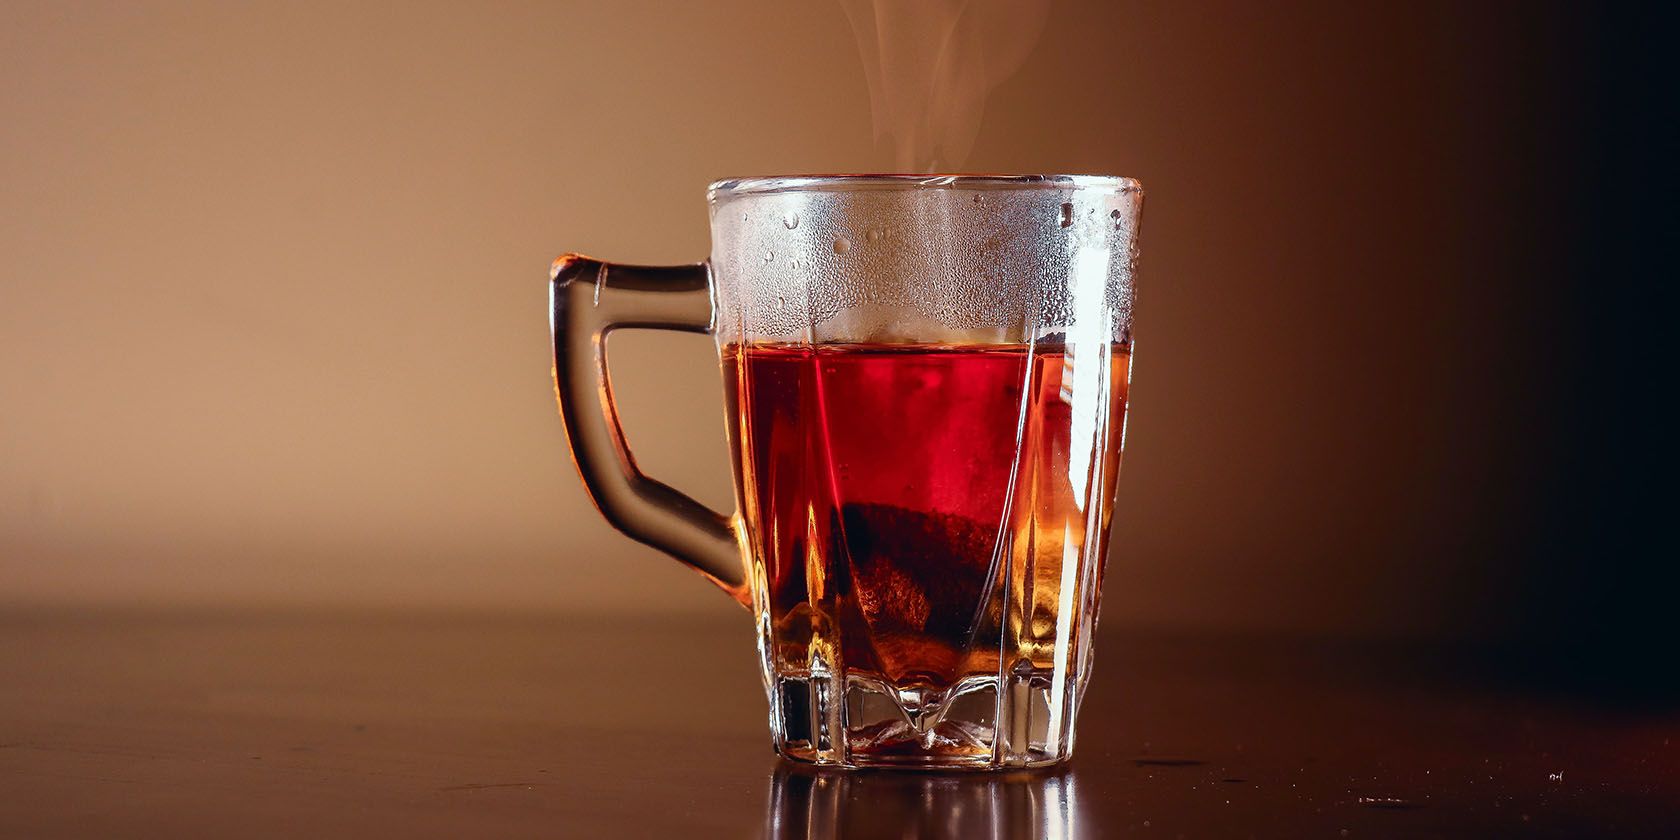 hot tea in a clear glass with steam